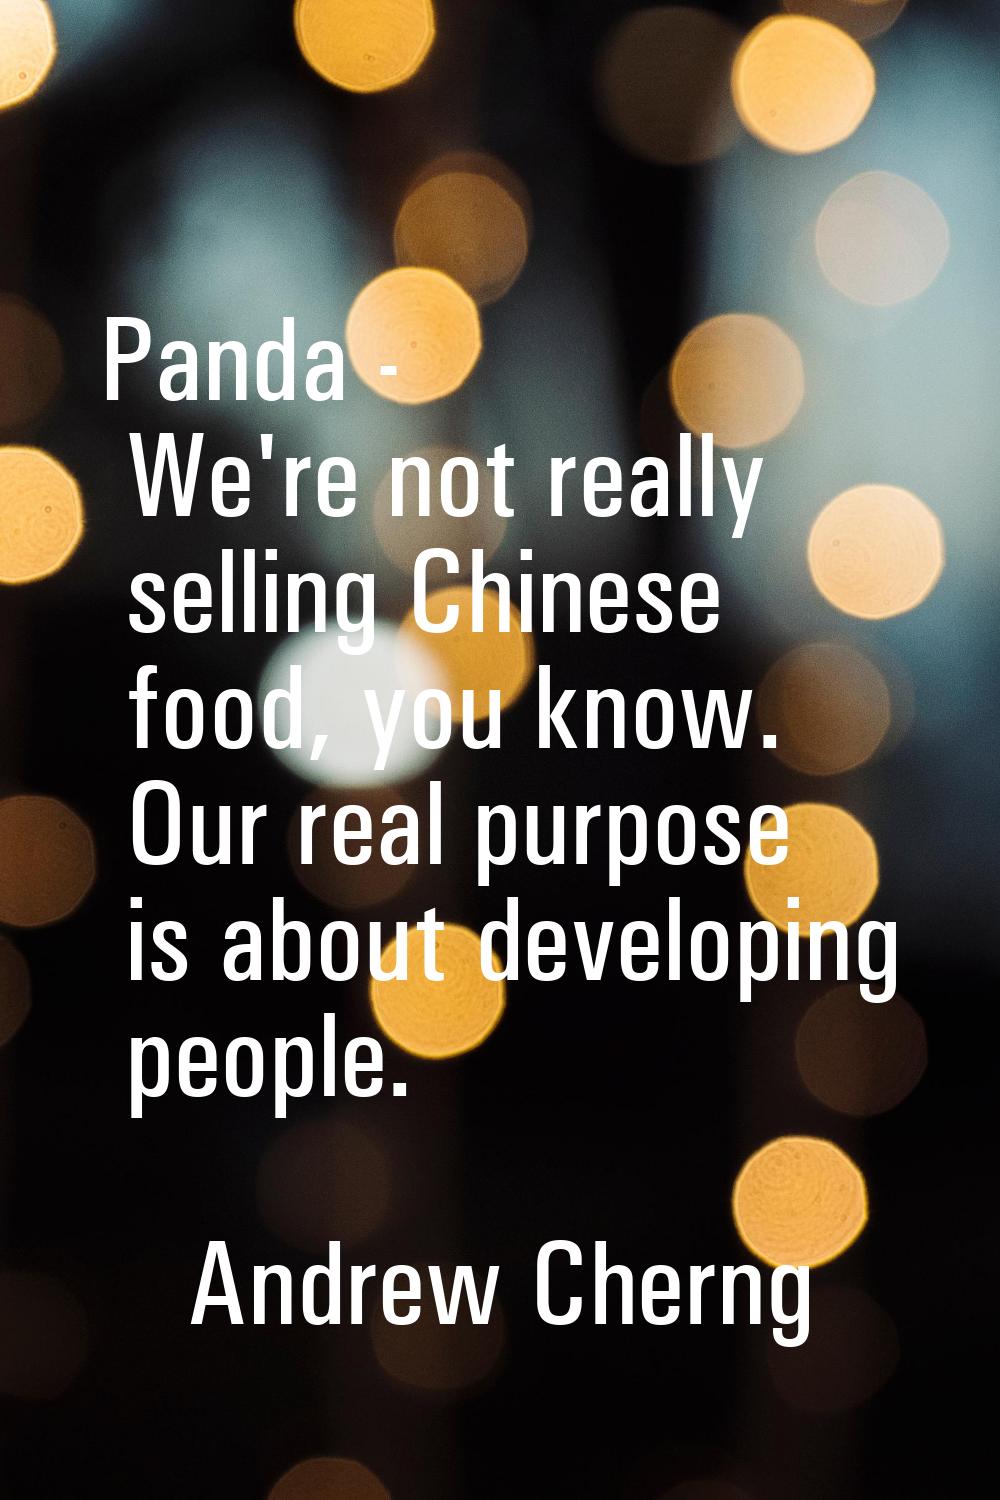 Panda - We're not really selling Chinese food, you know. Our real purpose is about developing peopl